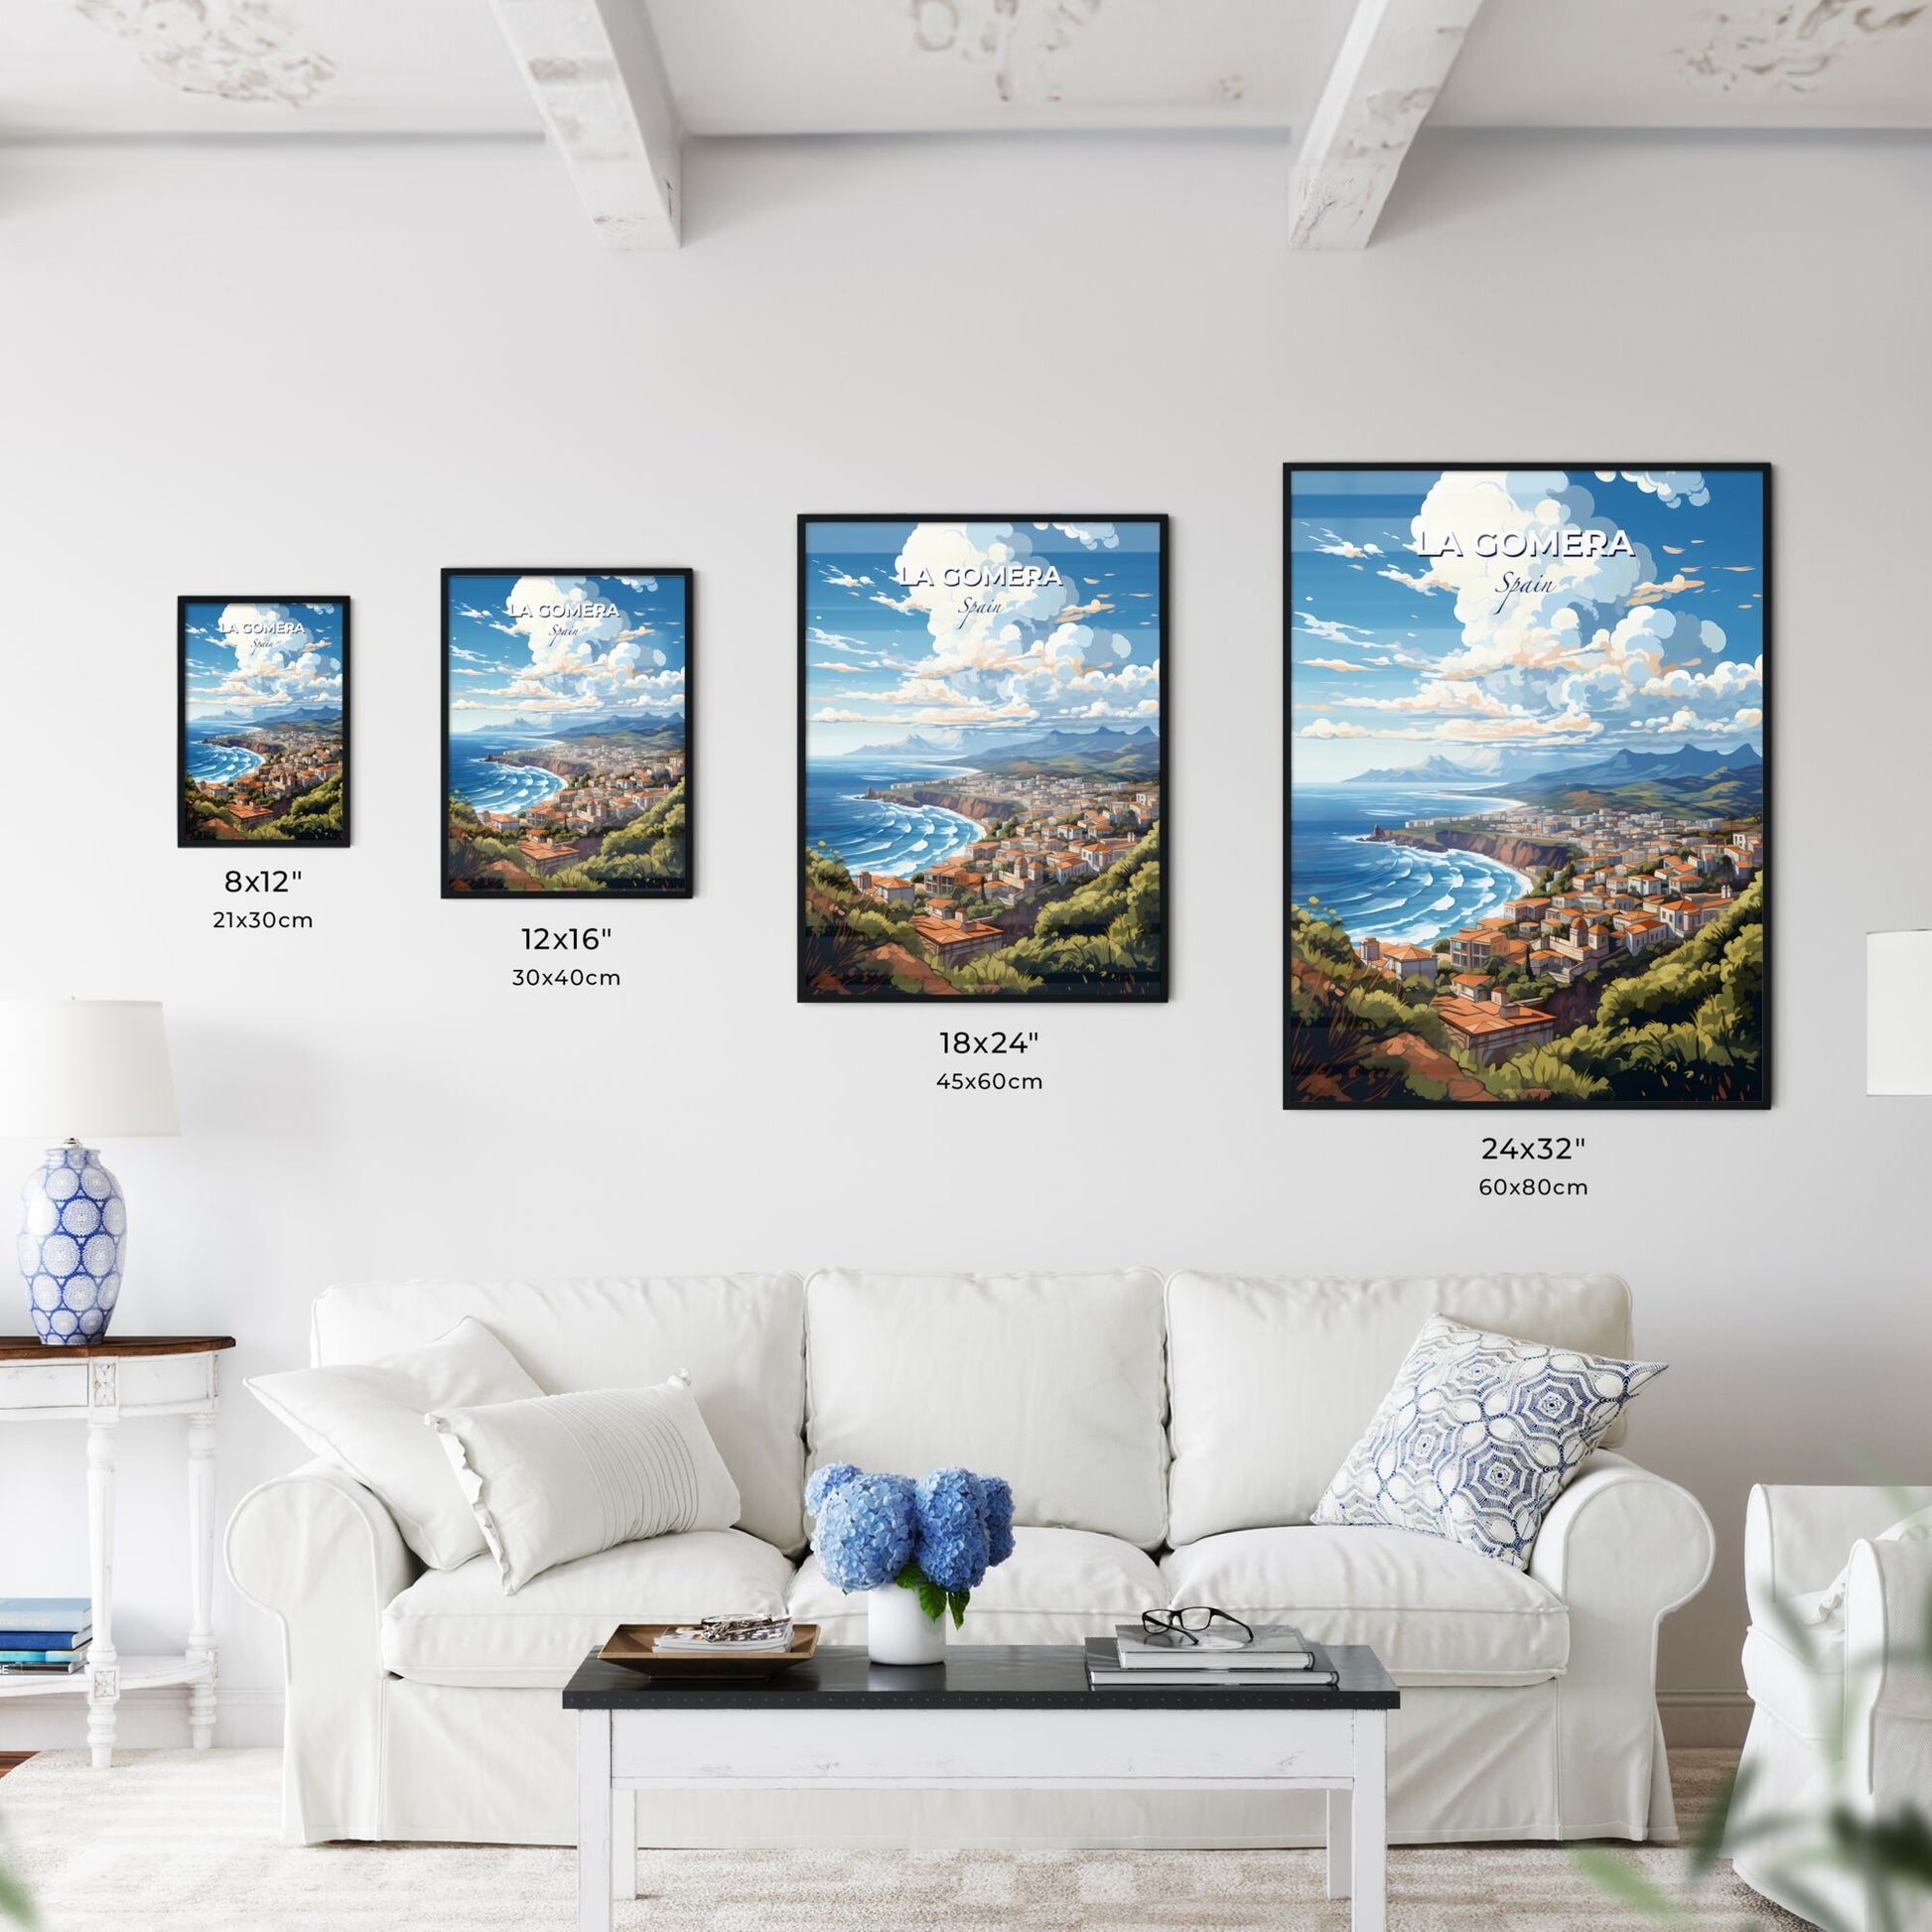 La Gomera Spain Skyline - A Landscape Of A Town On A Cliff By The Ocean - Customizable Travel Gift Default Title